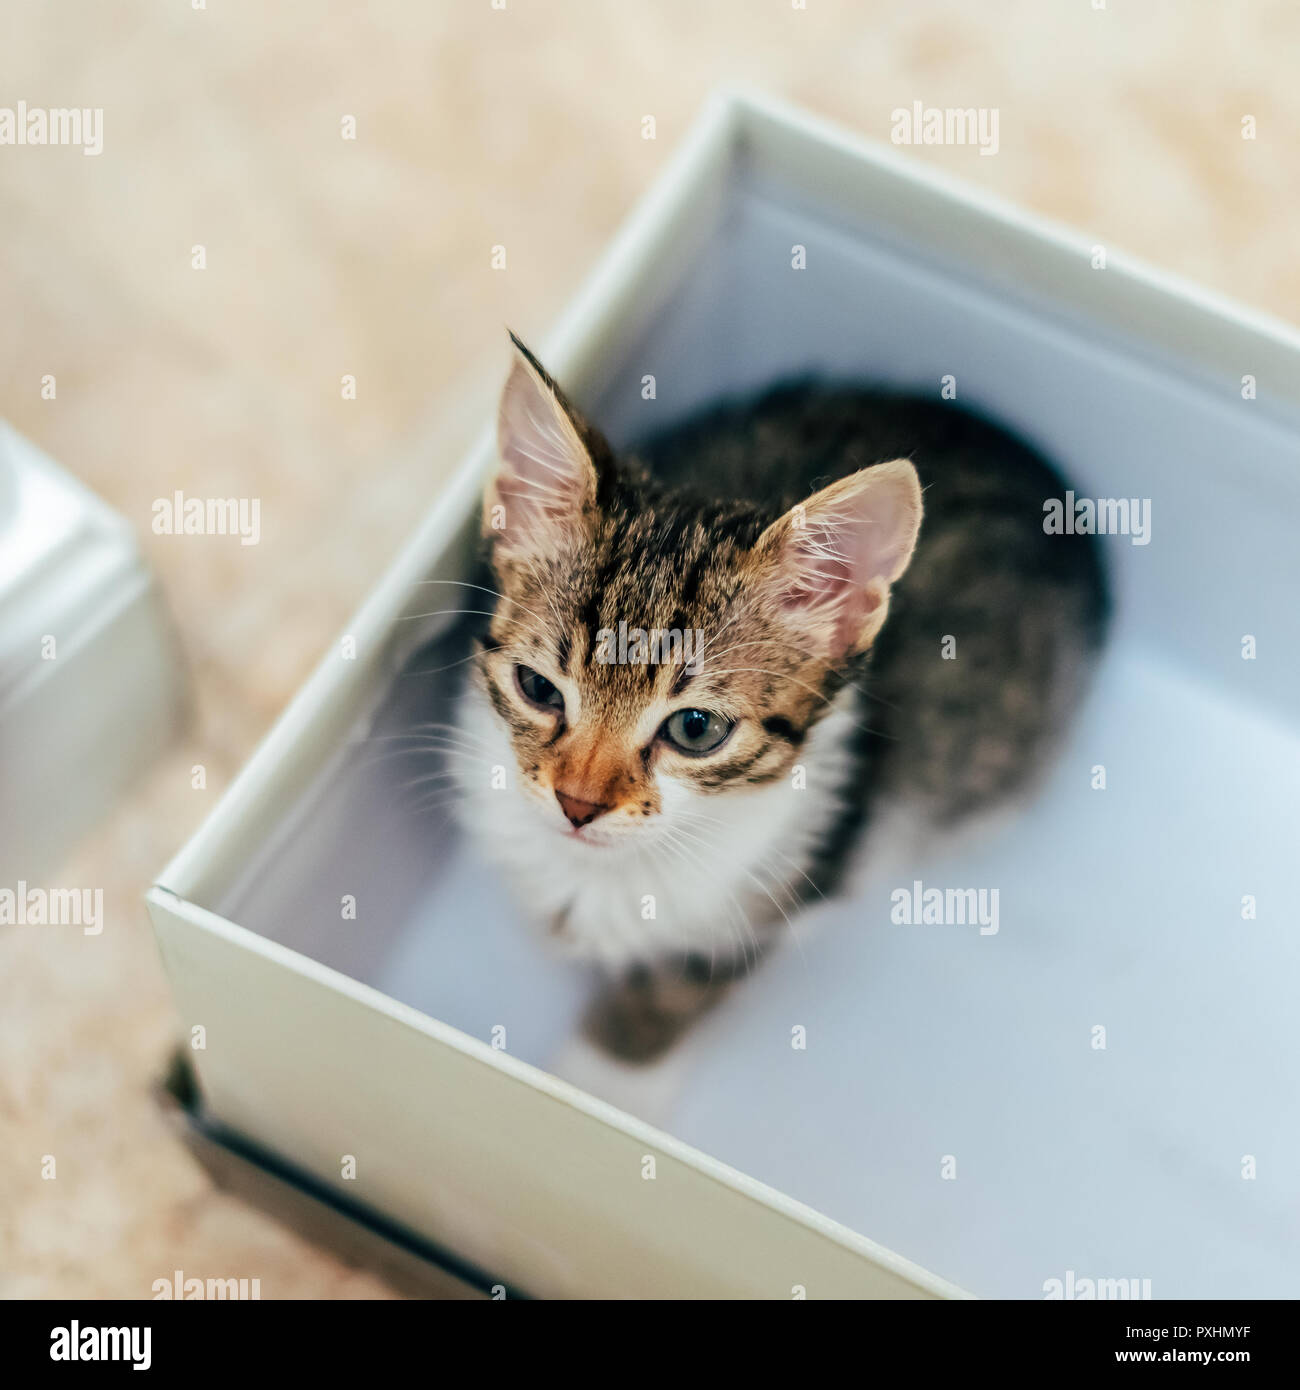 Cute Baby Cat In Small Box At Home Stock Photo